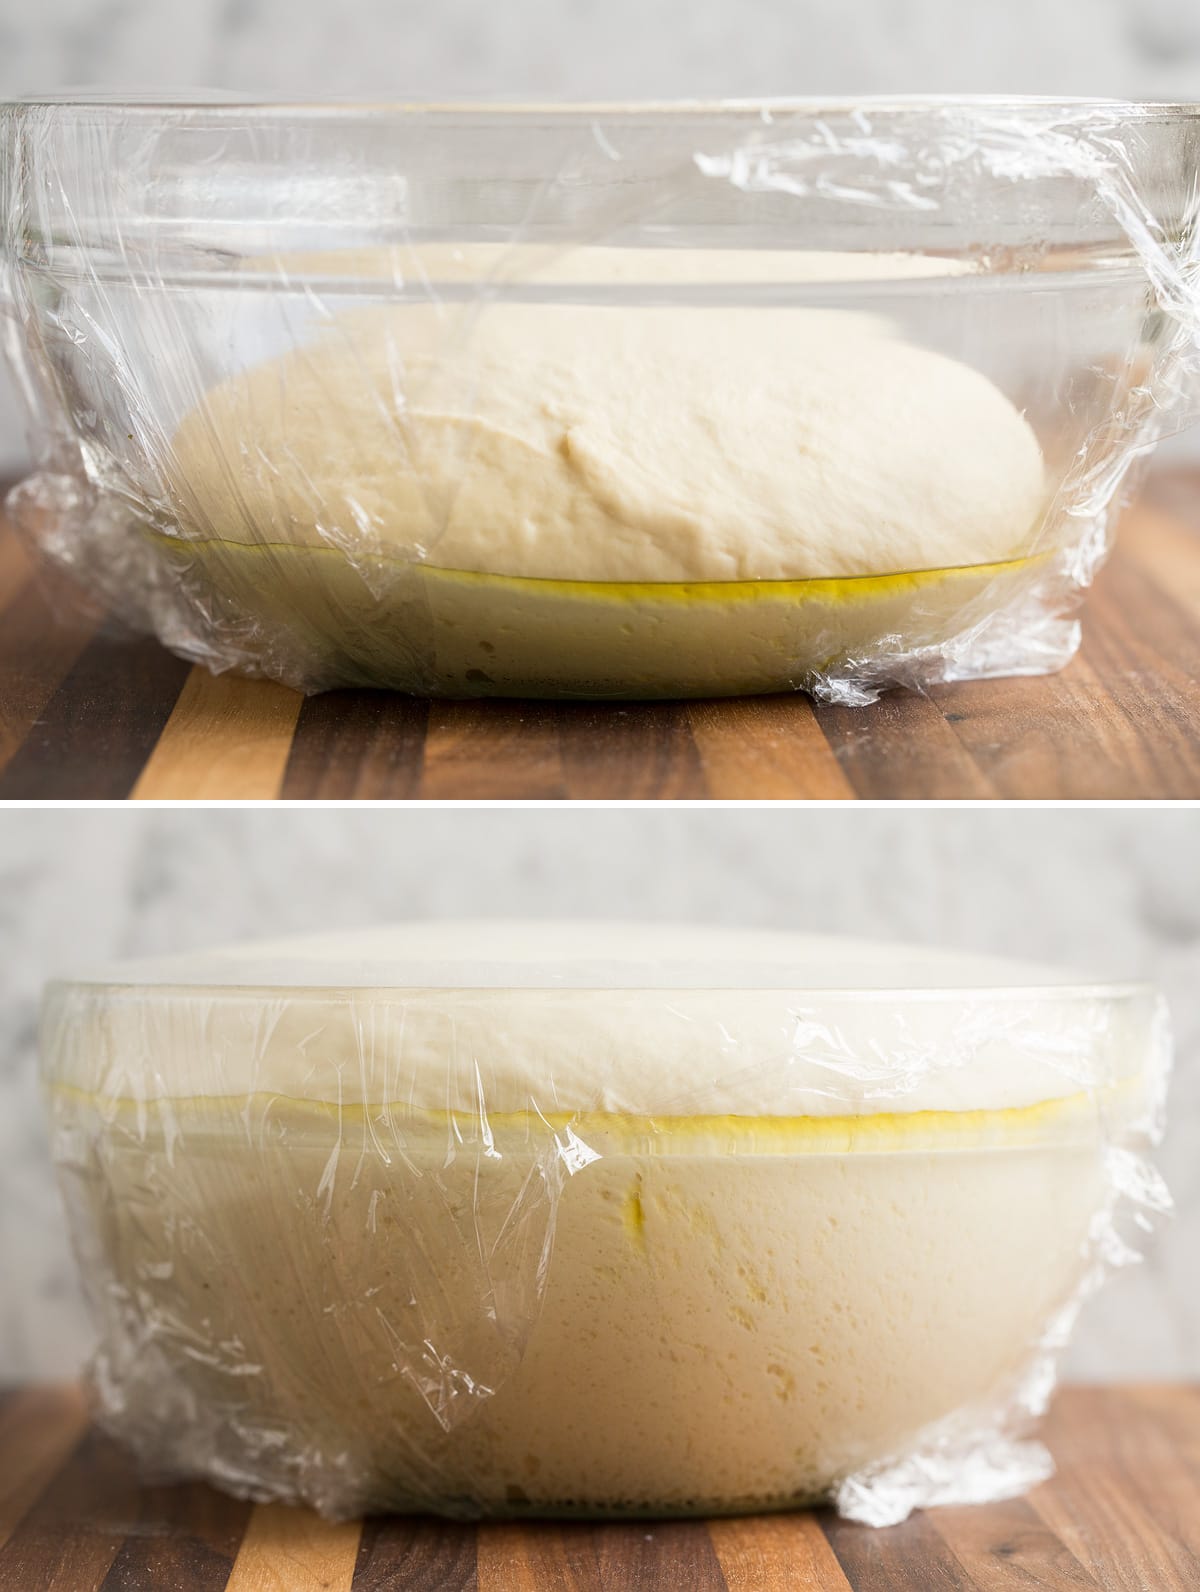 Pizza dough shown in a bowl before and after rising.